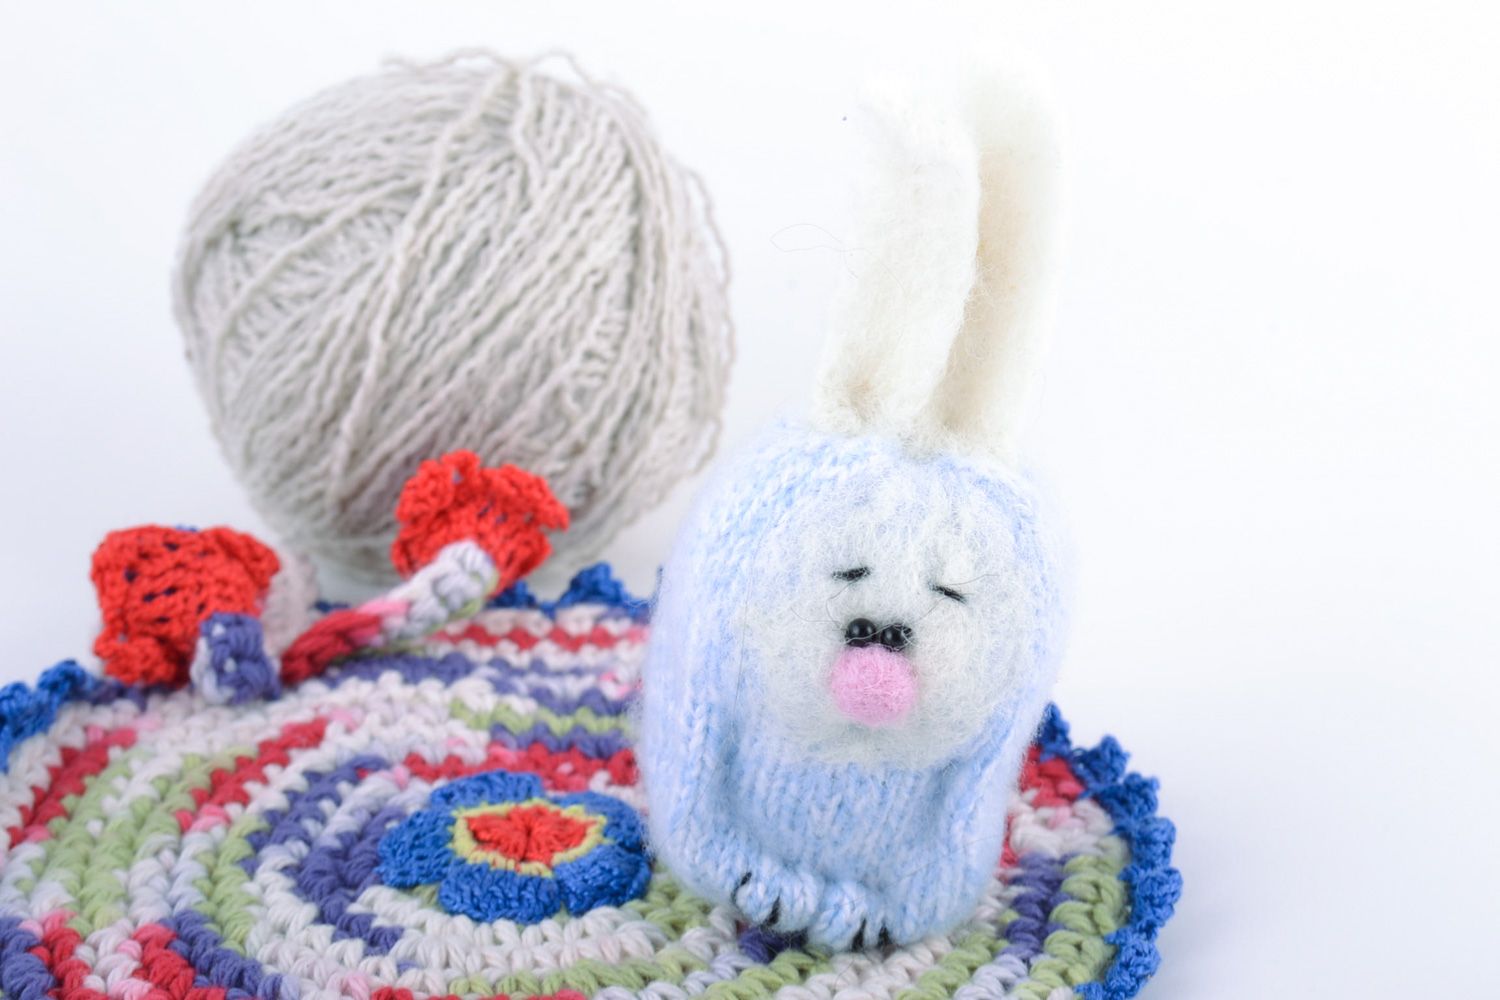 Handmade blue crochet toy long-eared hare with felted elements photo 1